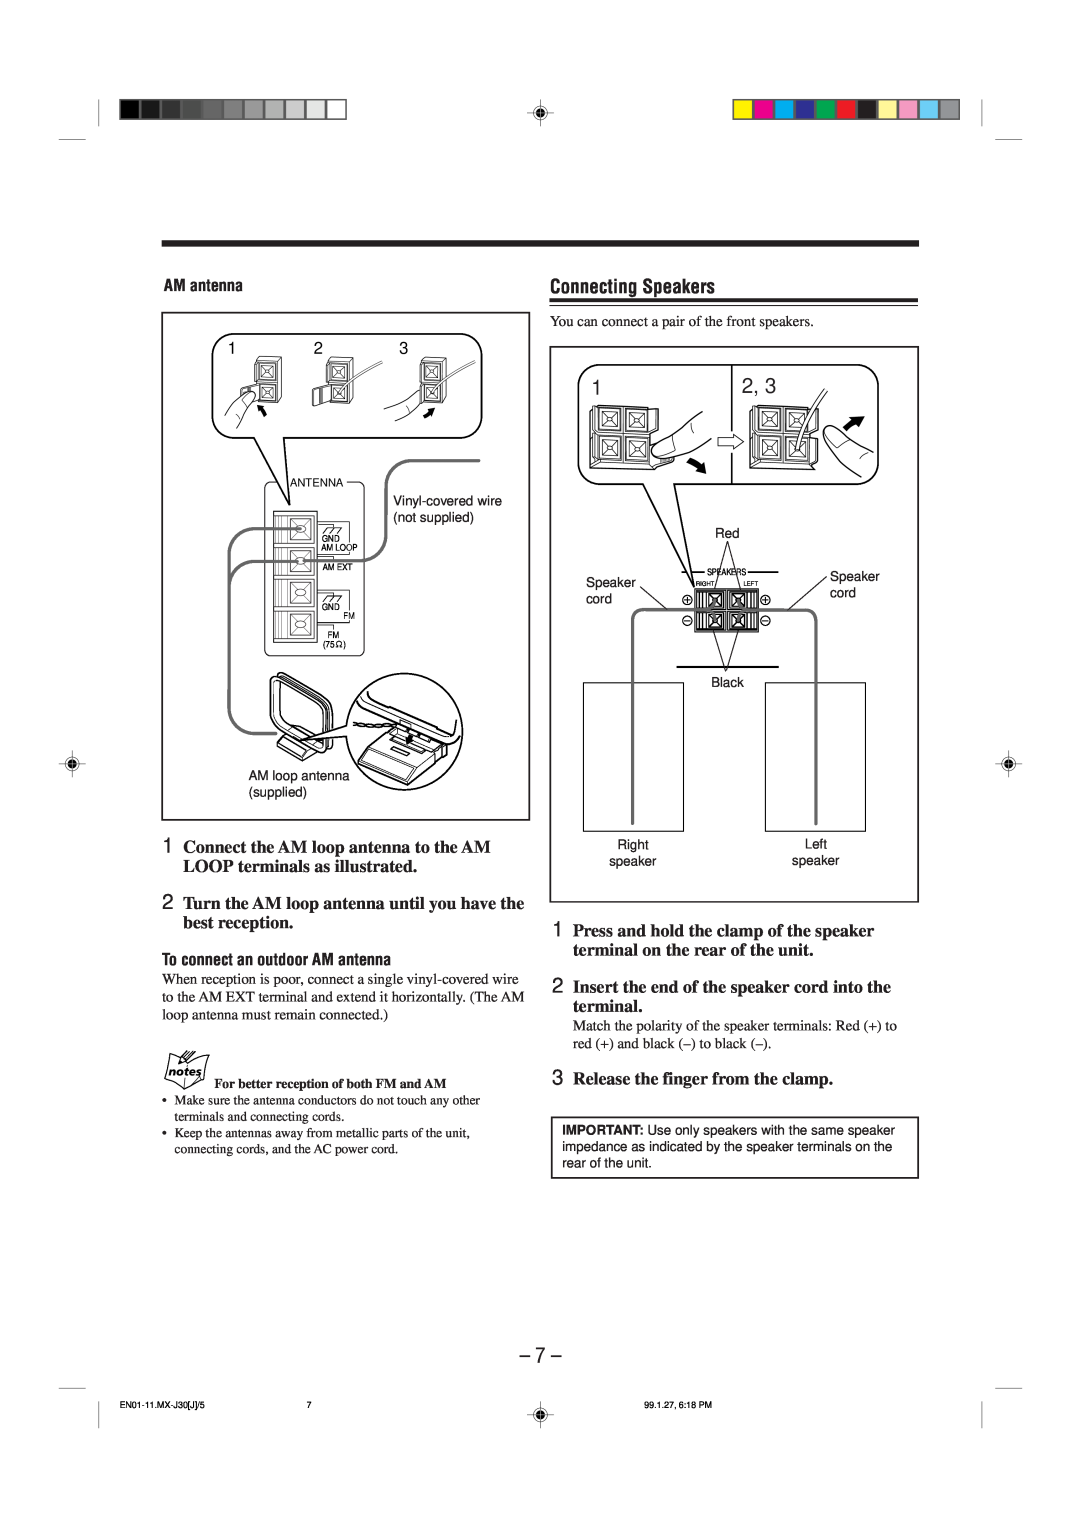 JVC MX-J30 manual Connecting Speakers, Connect the AM loop antenna to the AM LOOP terminals as illustrated, AM antenna 